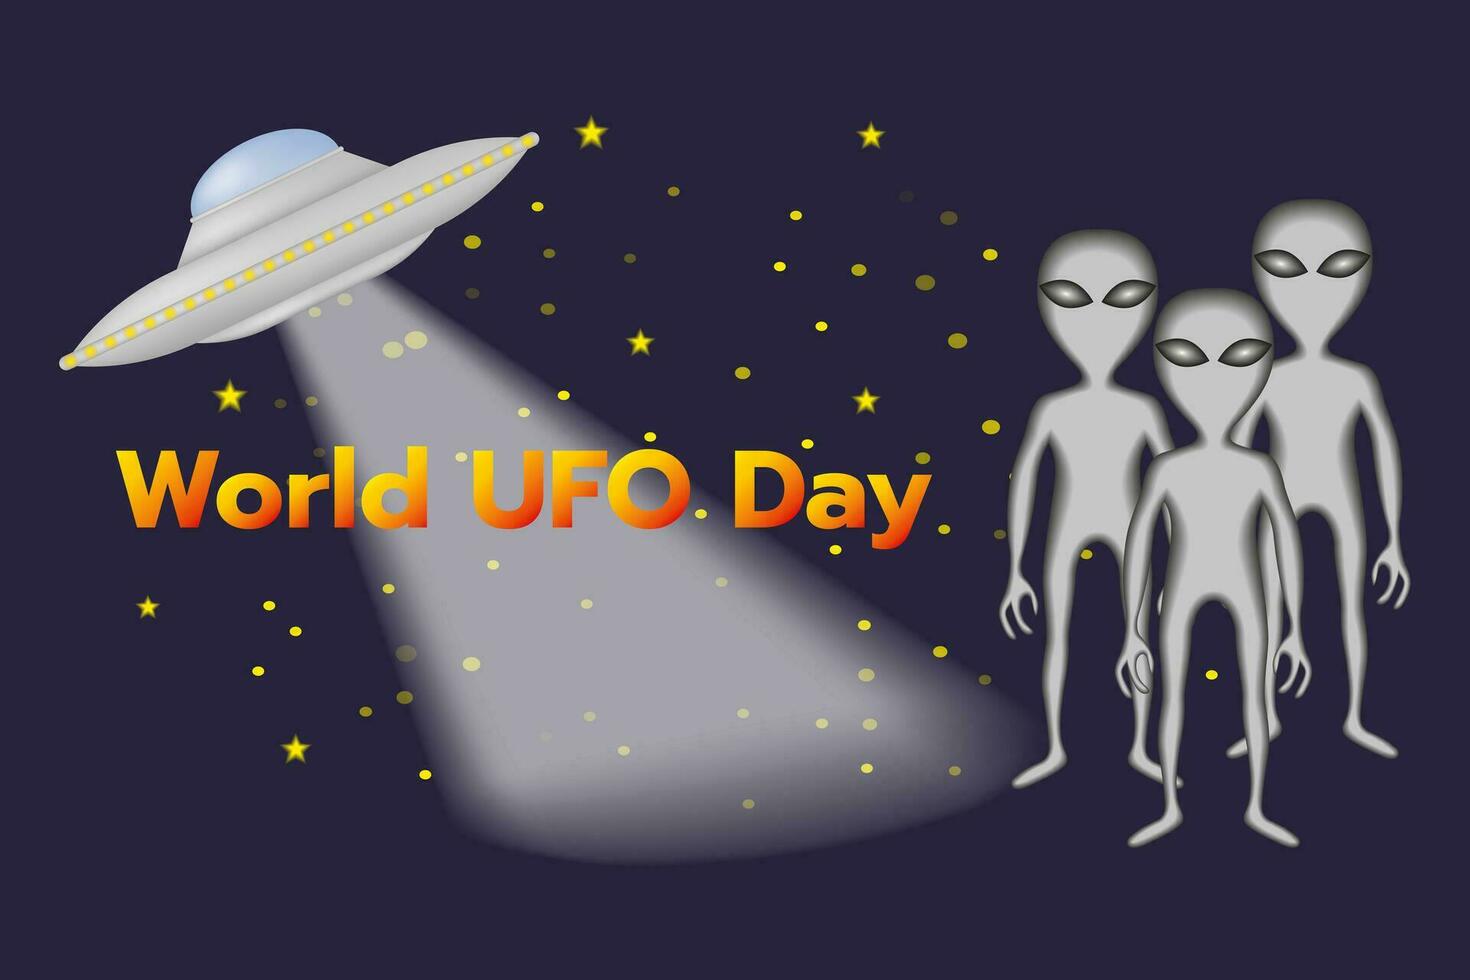 World UFO Day. Alien in space. Vector illustration with flying saucer, aliens, night sky with stars. For poster, banner, greeting card.